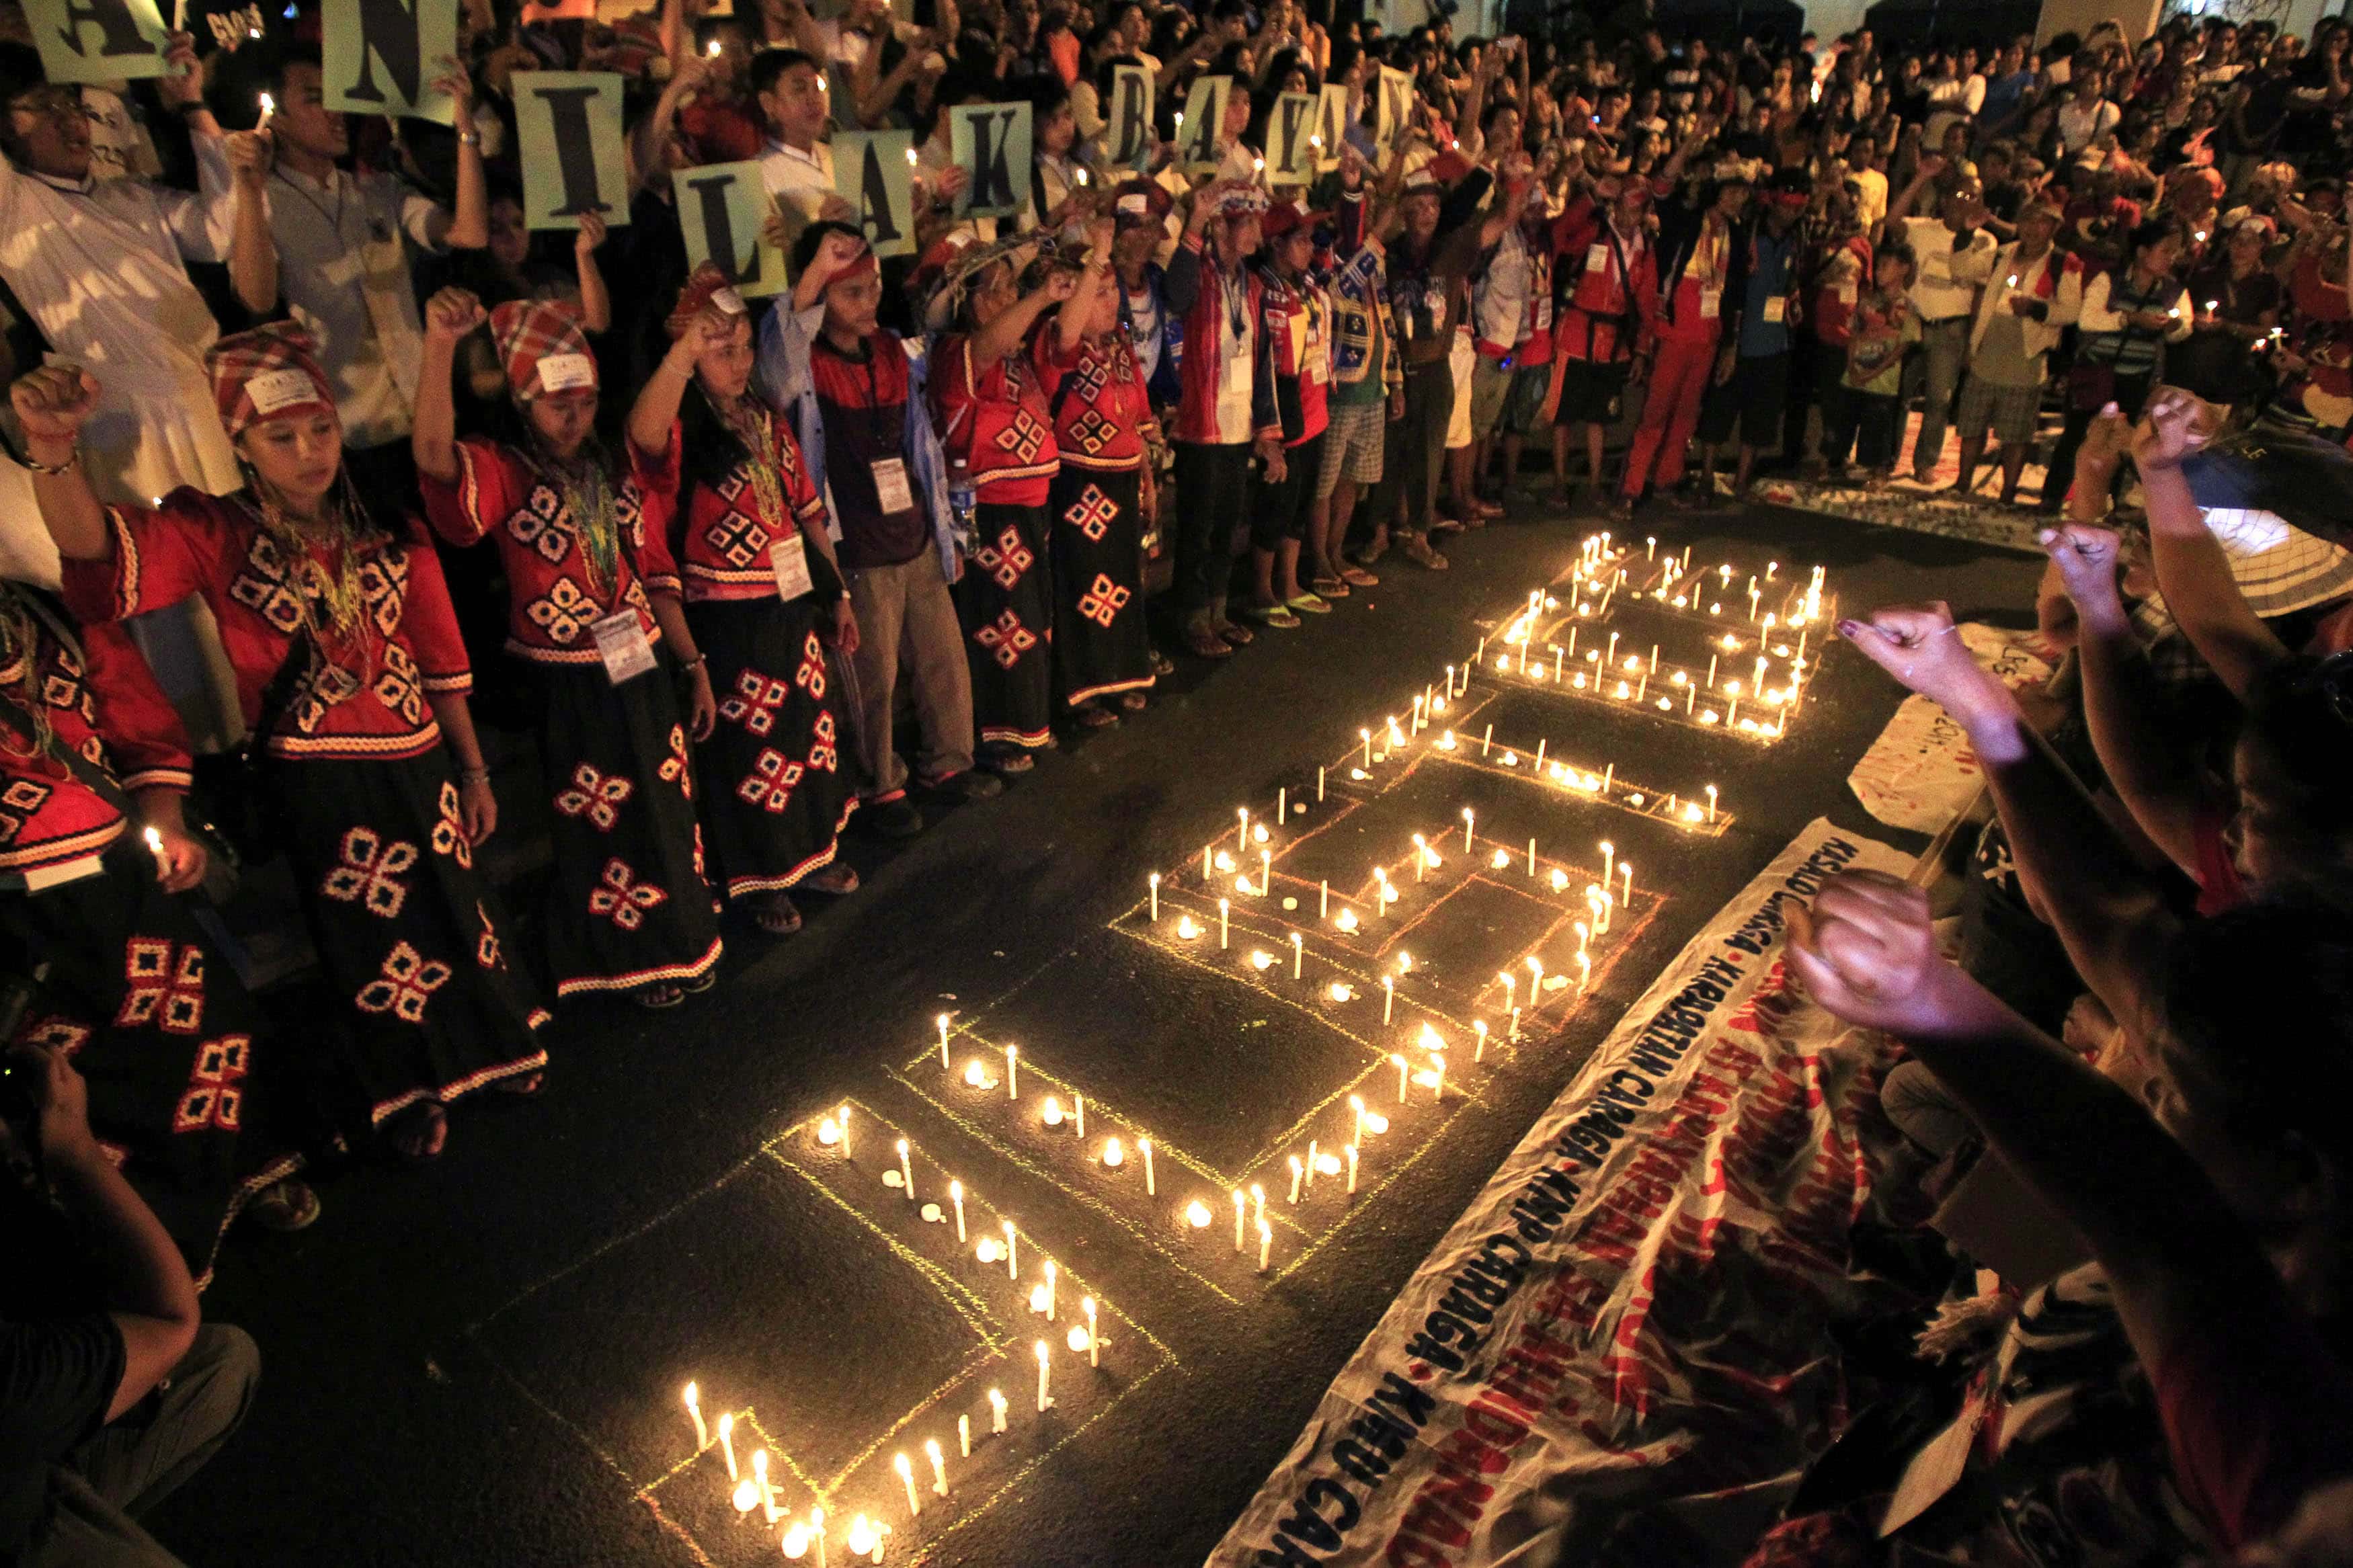 Candles spell out "Justice" for the victims of the 2009 murder of 32 journalists during a protest in Paranaque city, metro Manila, 23 November 2014, REUTERS/Romeo Ranoco